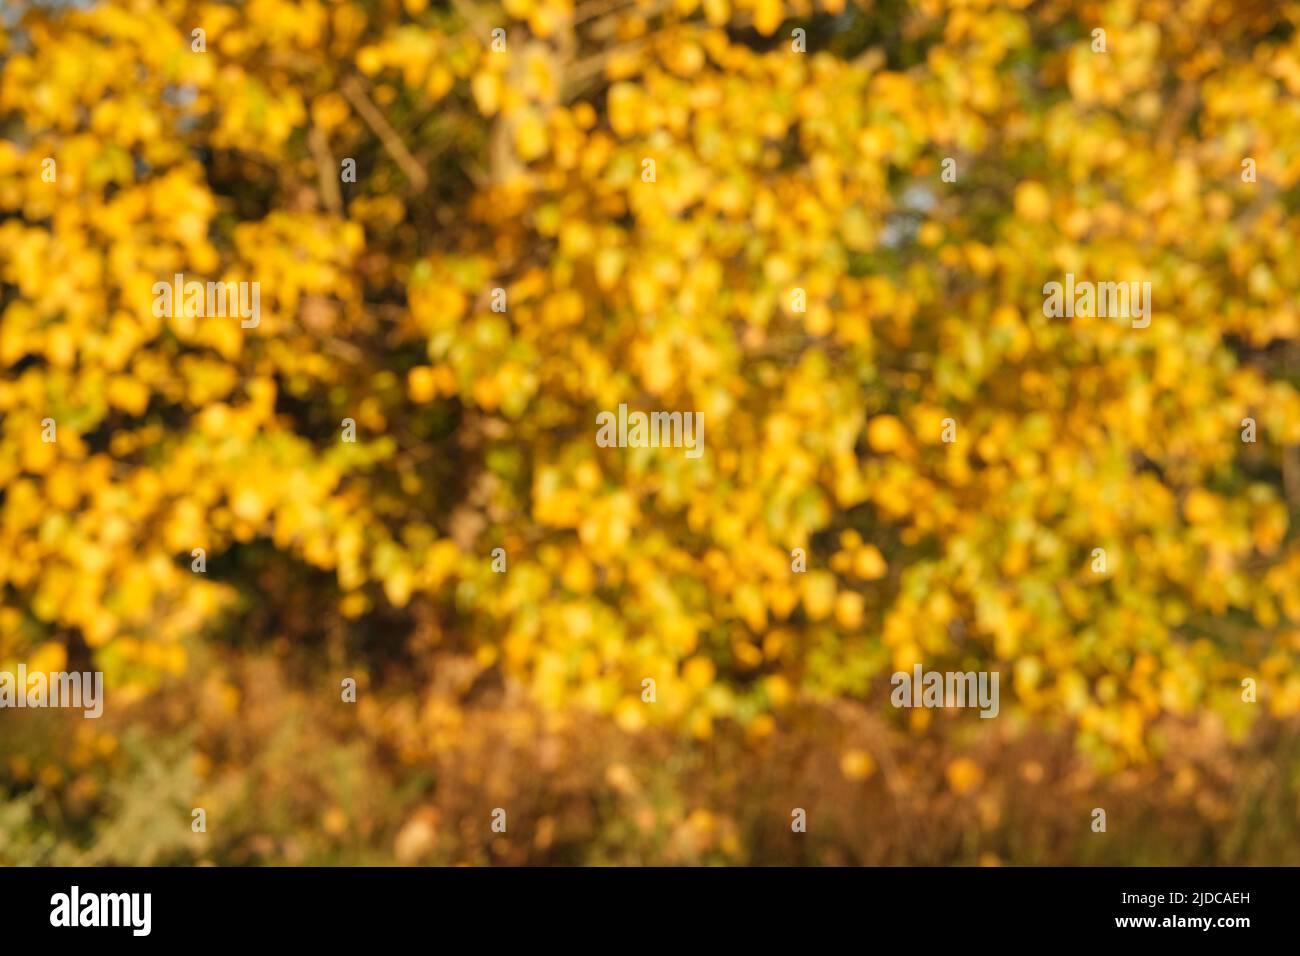 Common matchwoodPoplar tree, golden colour, out of focus for background use. Stock Photo